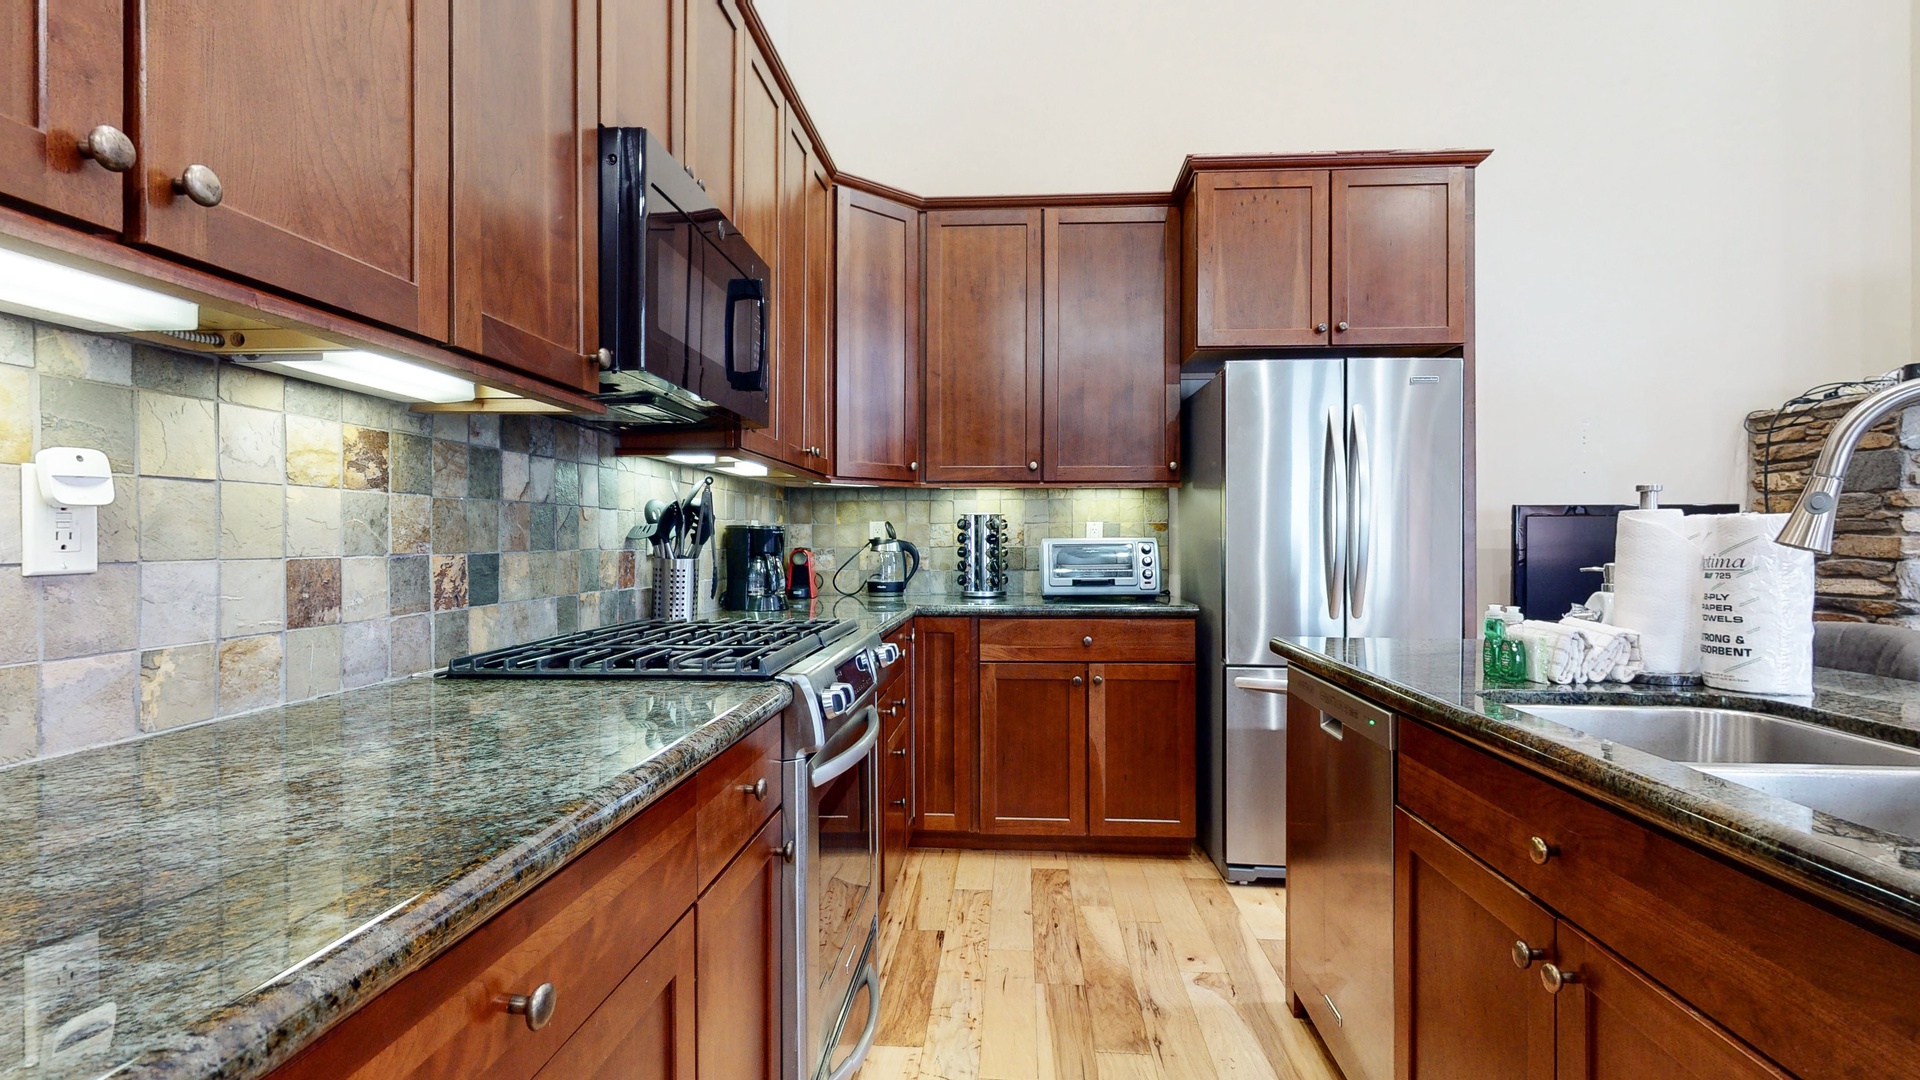 Kitchen with drip coffee maker, blender, dishwasher, gas stovetop and more